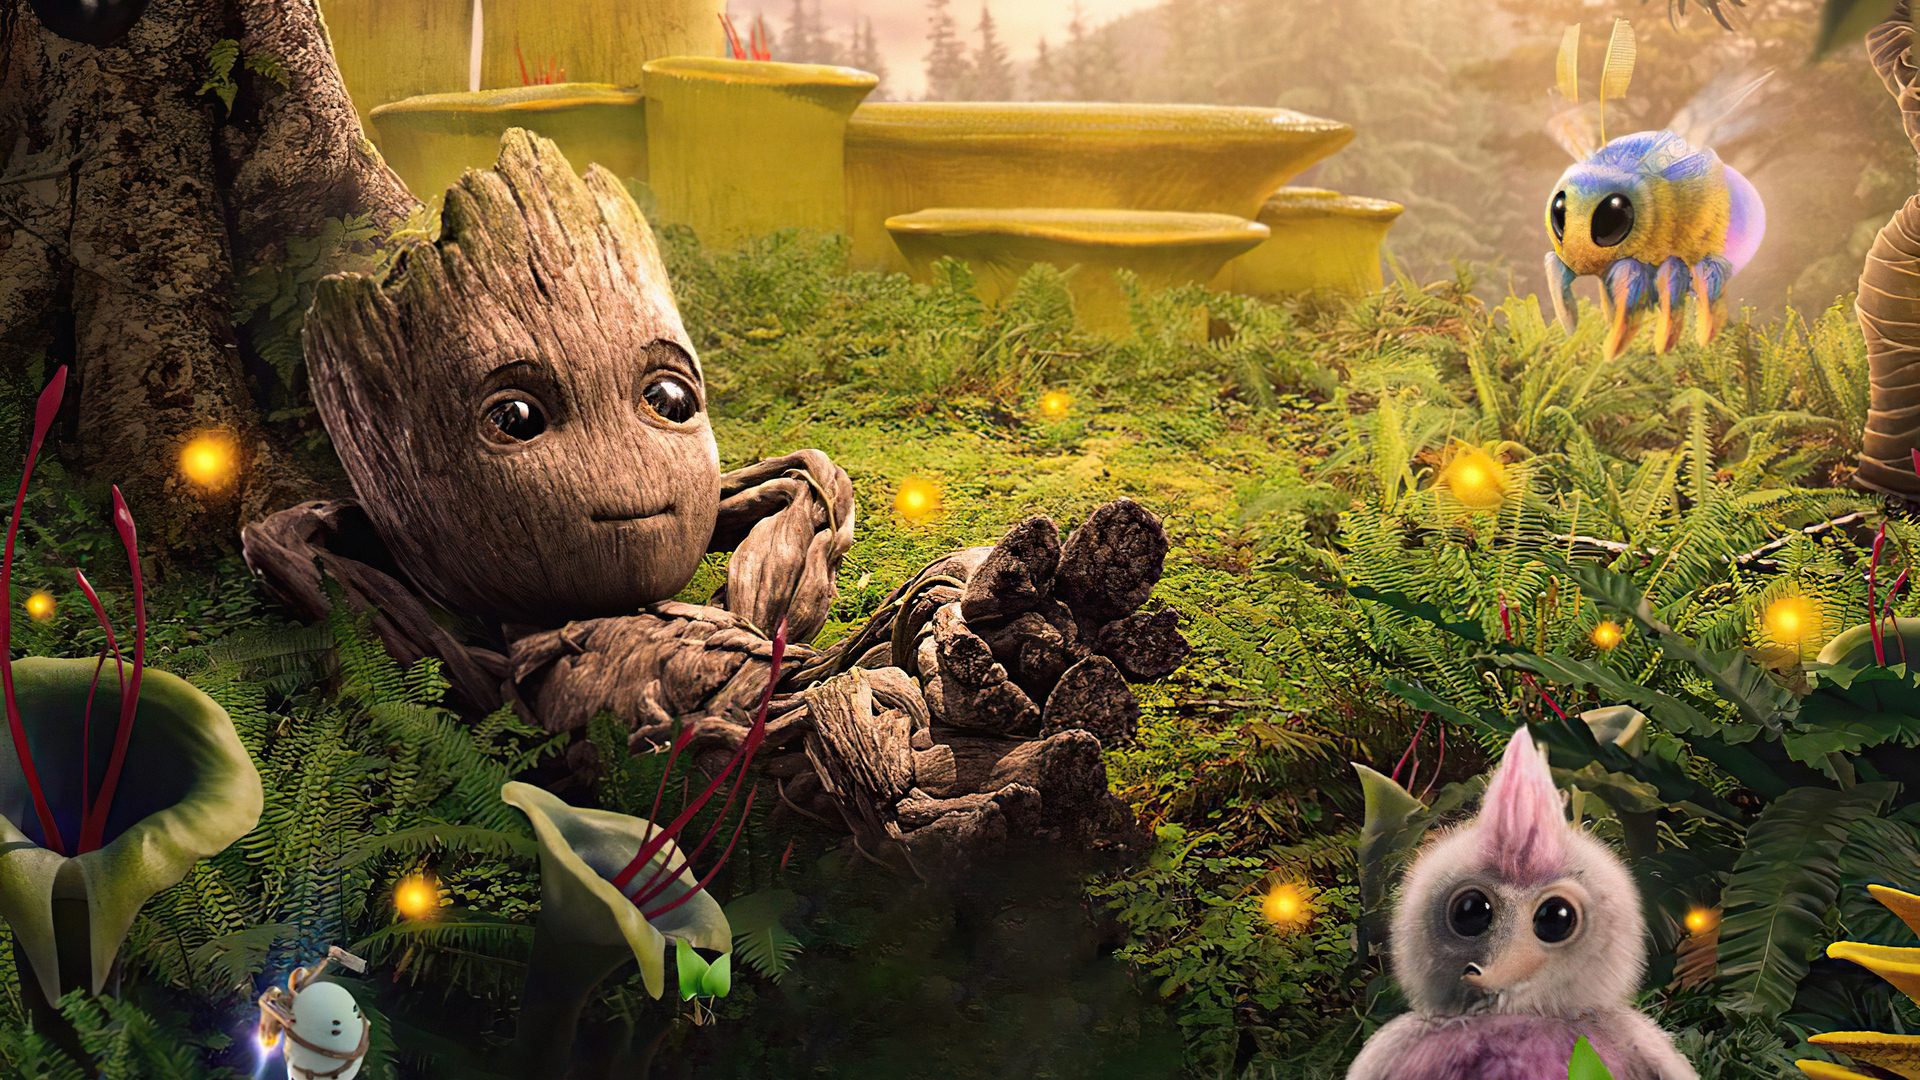 I Am Groot HD Aesthetic 1080P Laptop Full HD Wallpaper, HD TV Series 4K Wallpaper, Image, Photo and Background